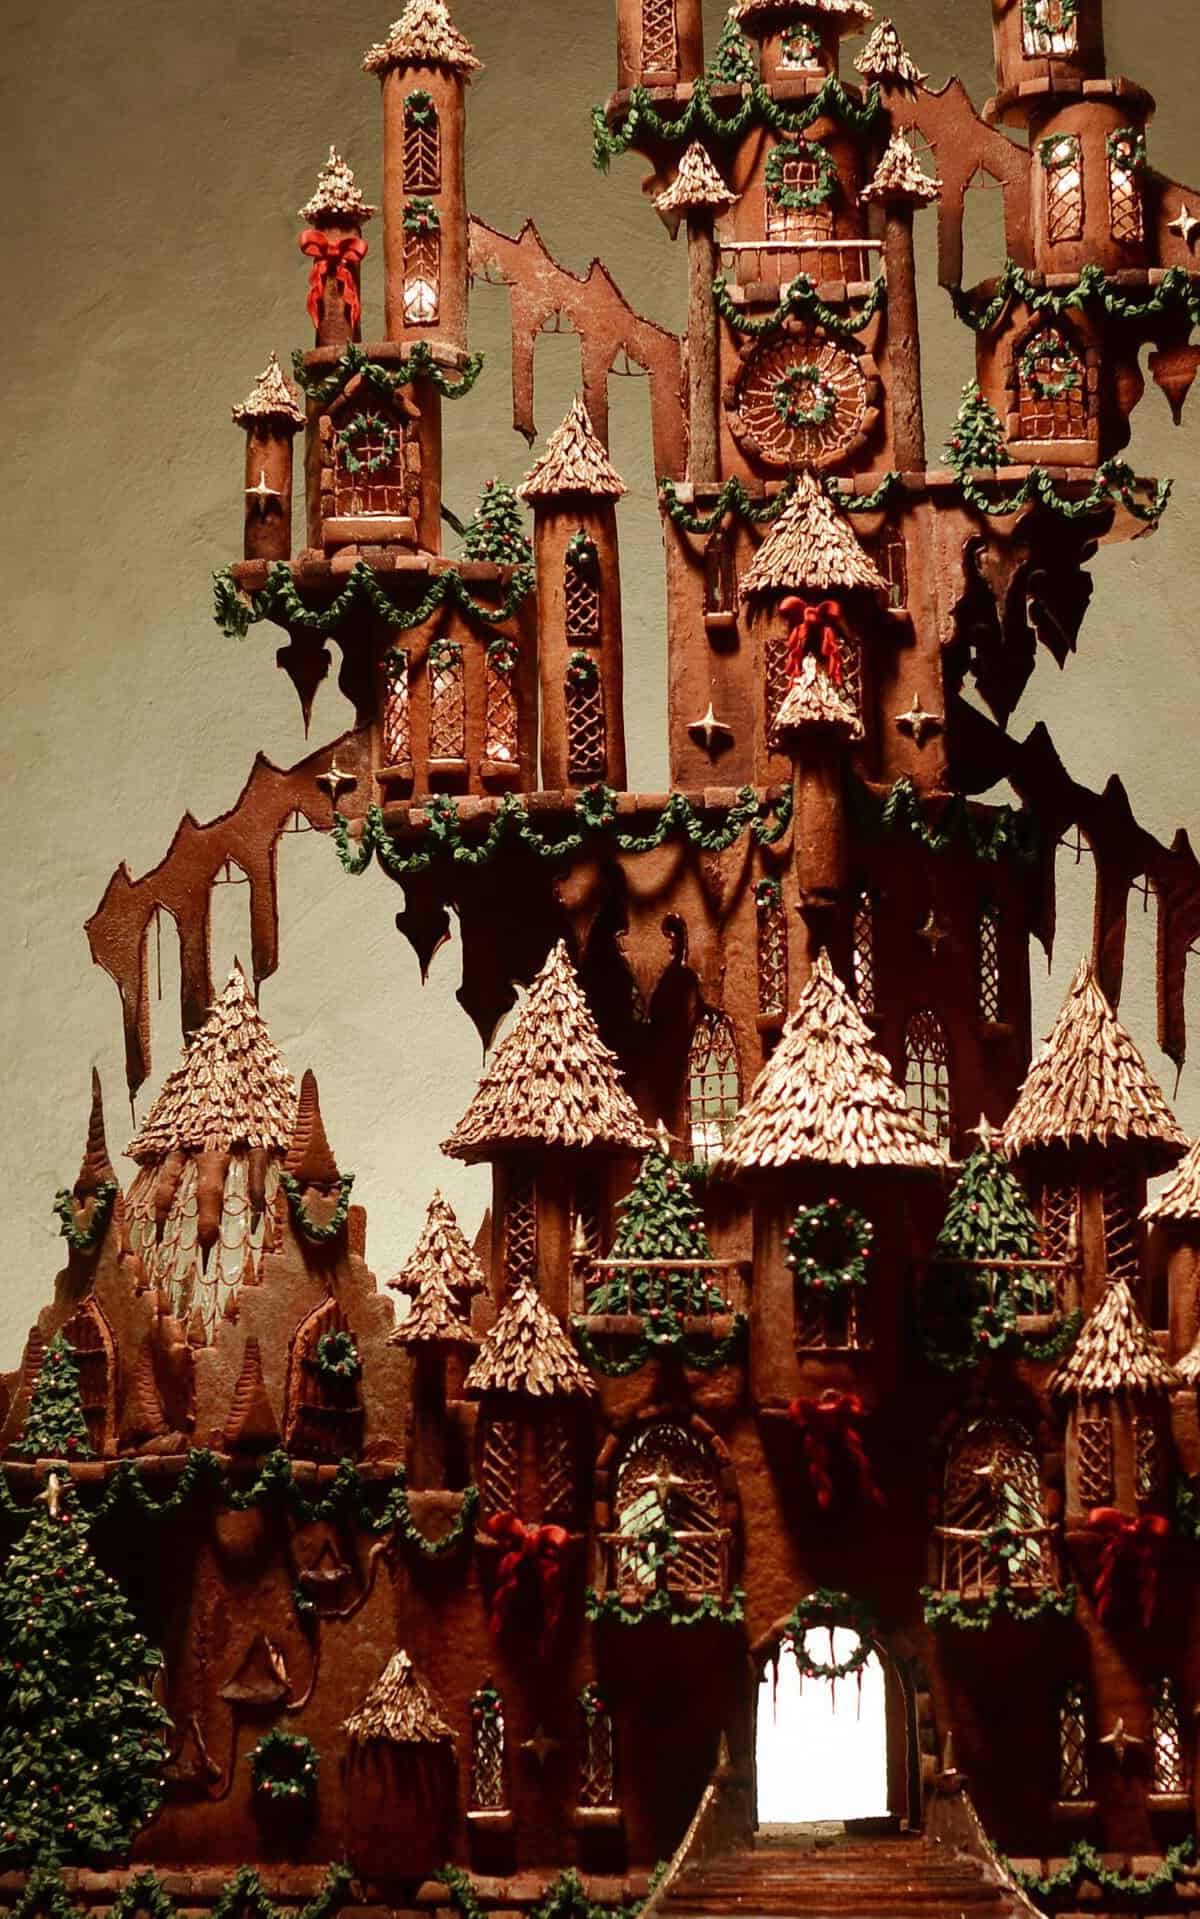 Deliciously Spiced Gingerbread Castle Recipe for Holidays